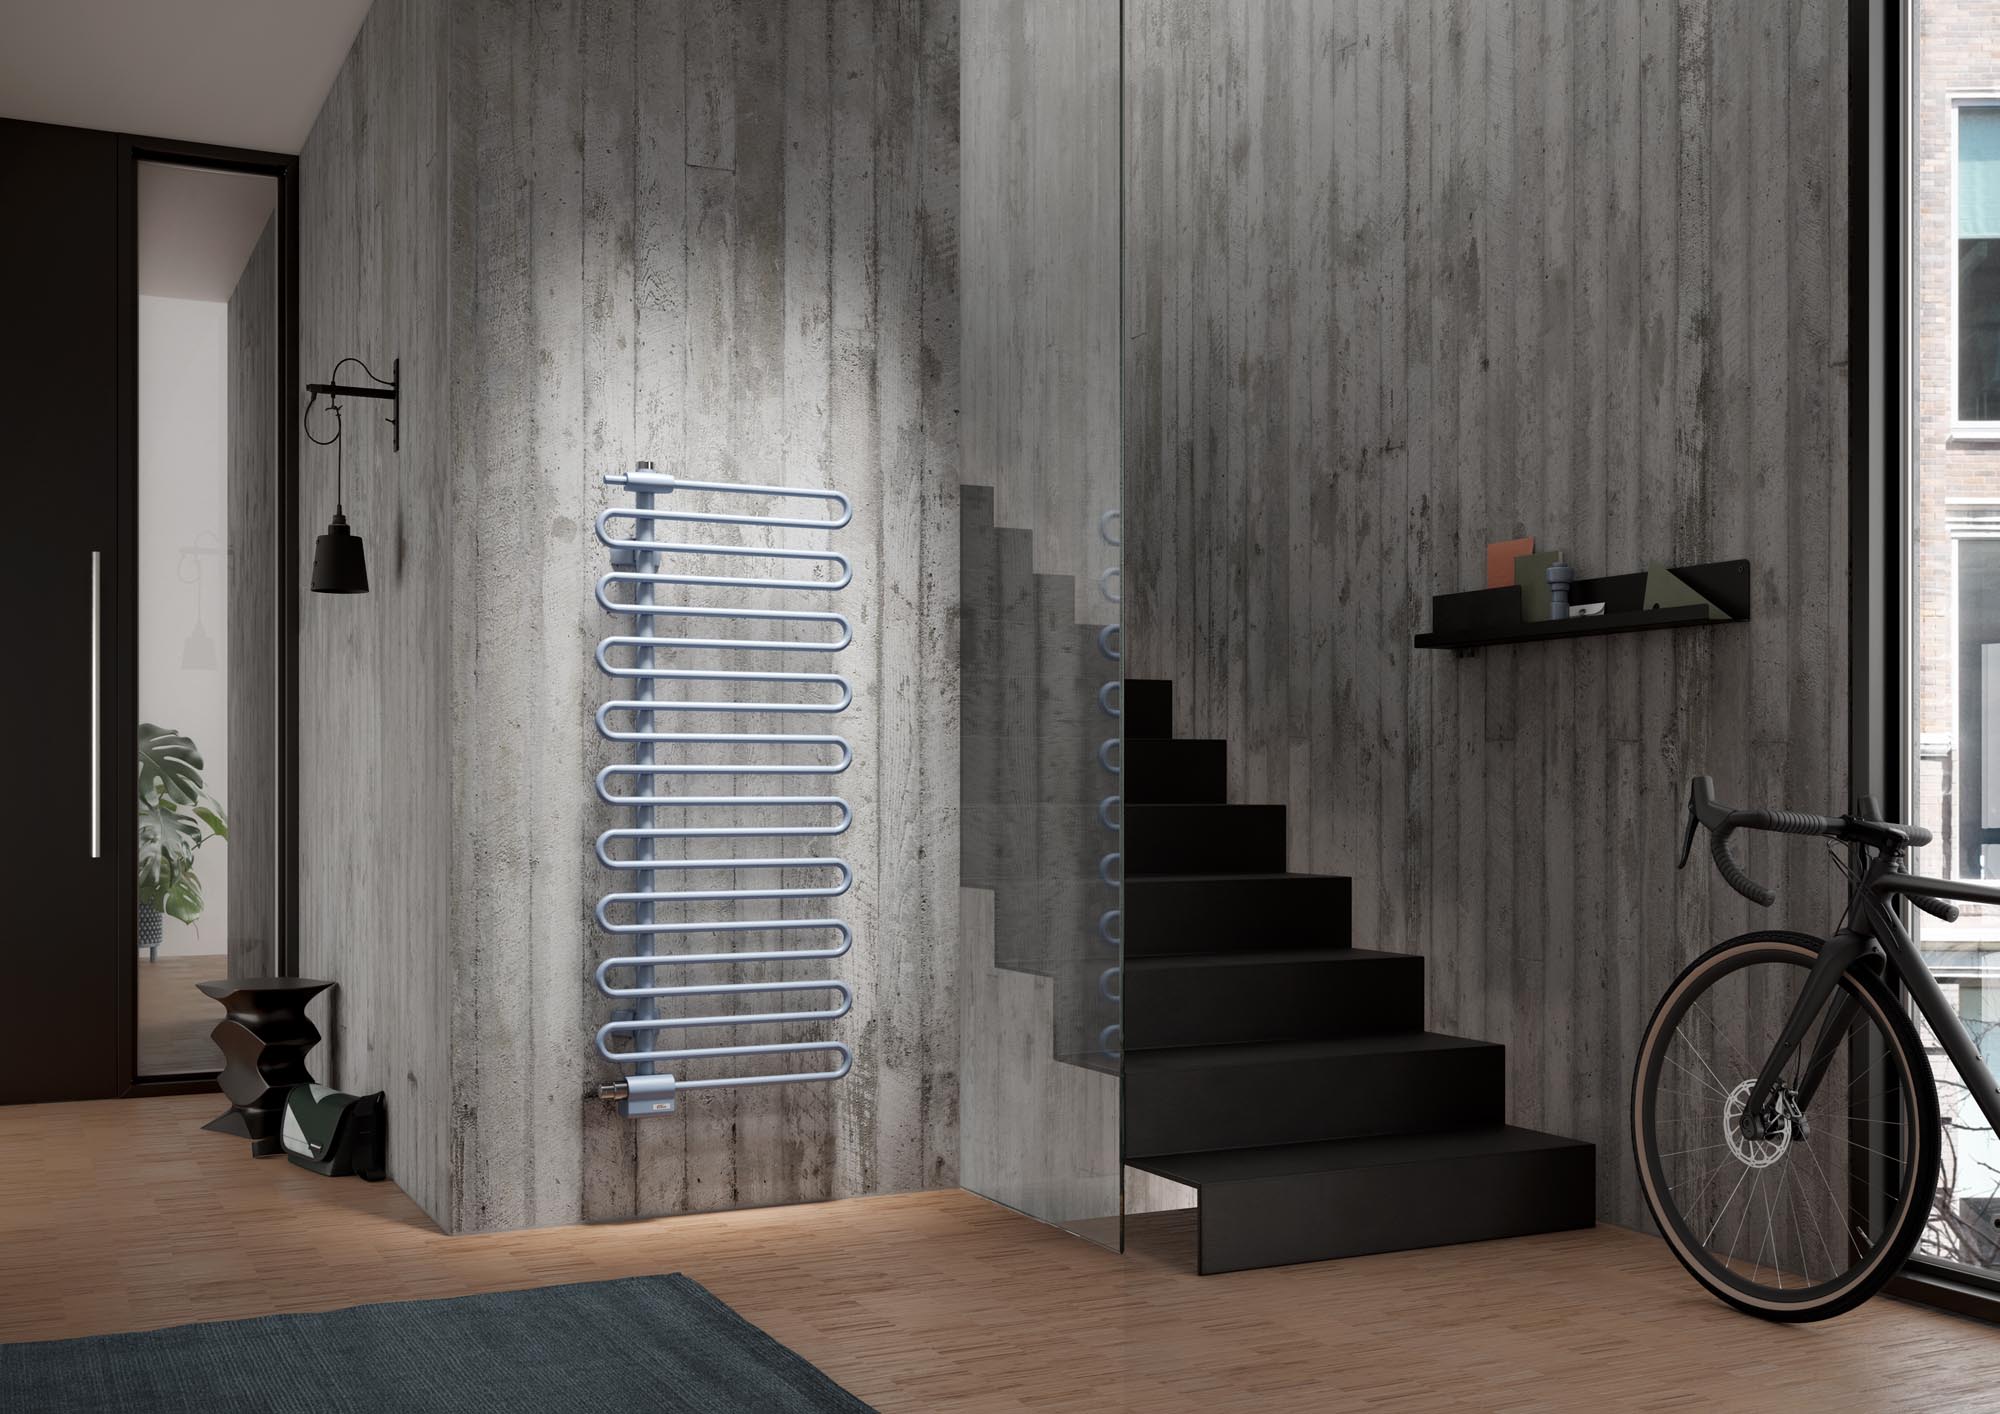 On the Kermi Icaro design and bathroom radiator, the airy lightness of the vibrant dynamics has been retained along with the exciting asymmetry.